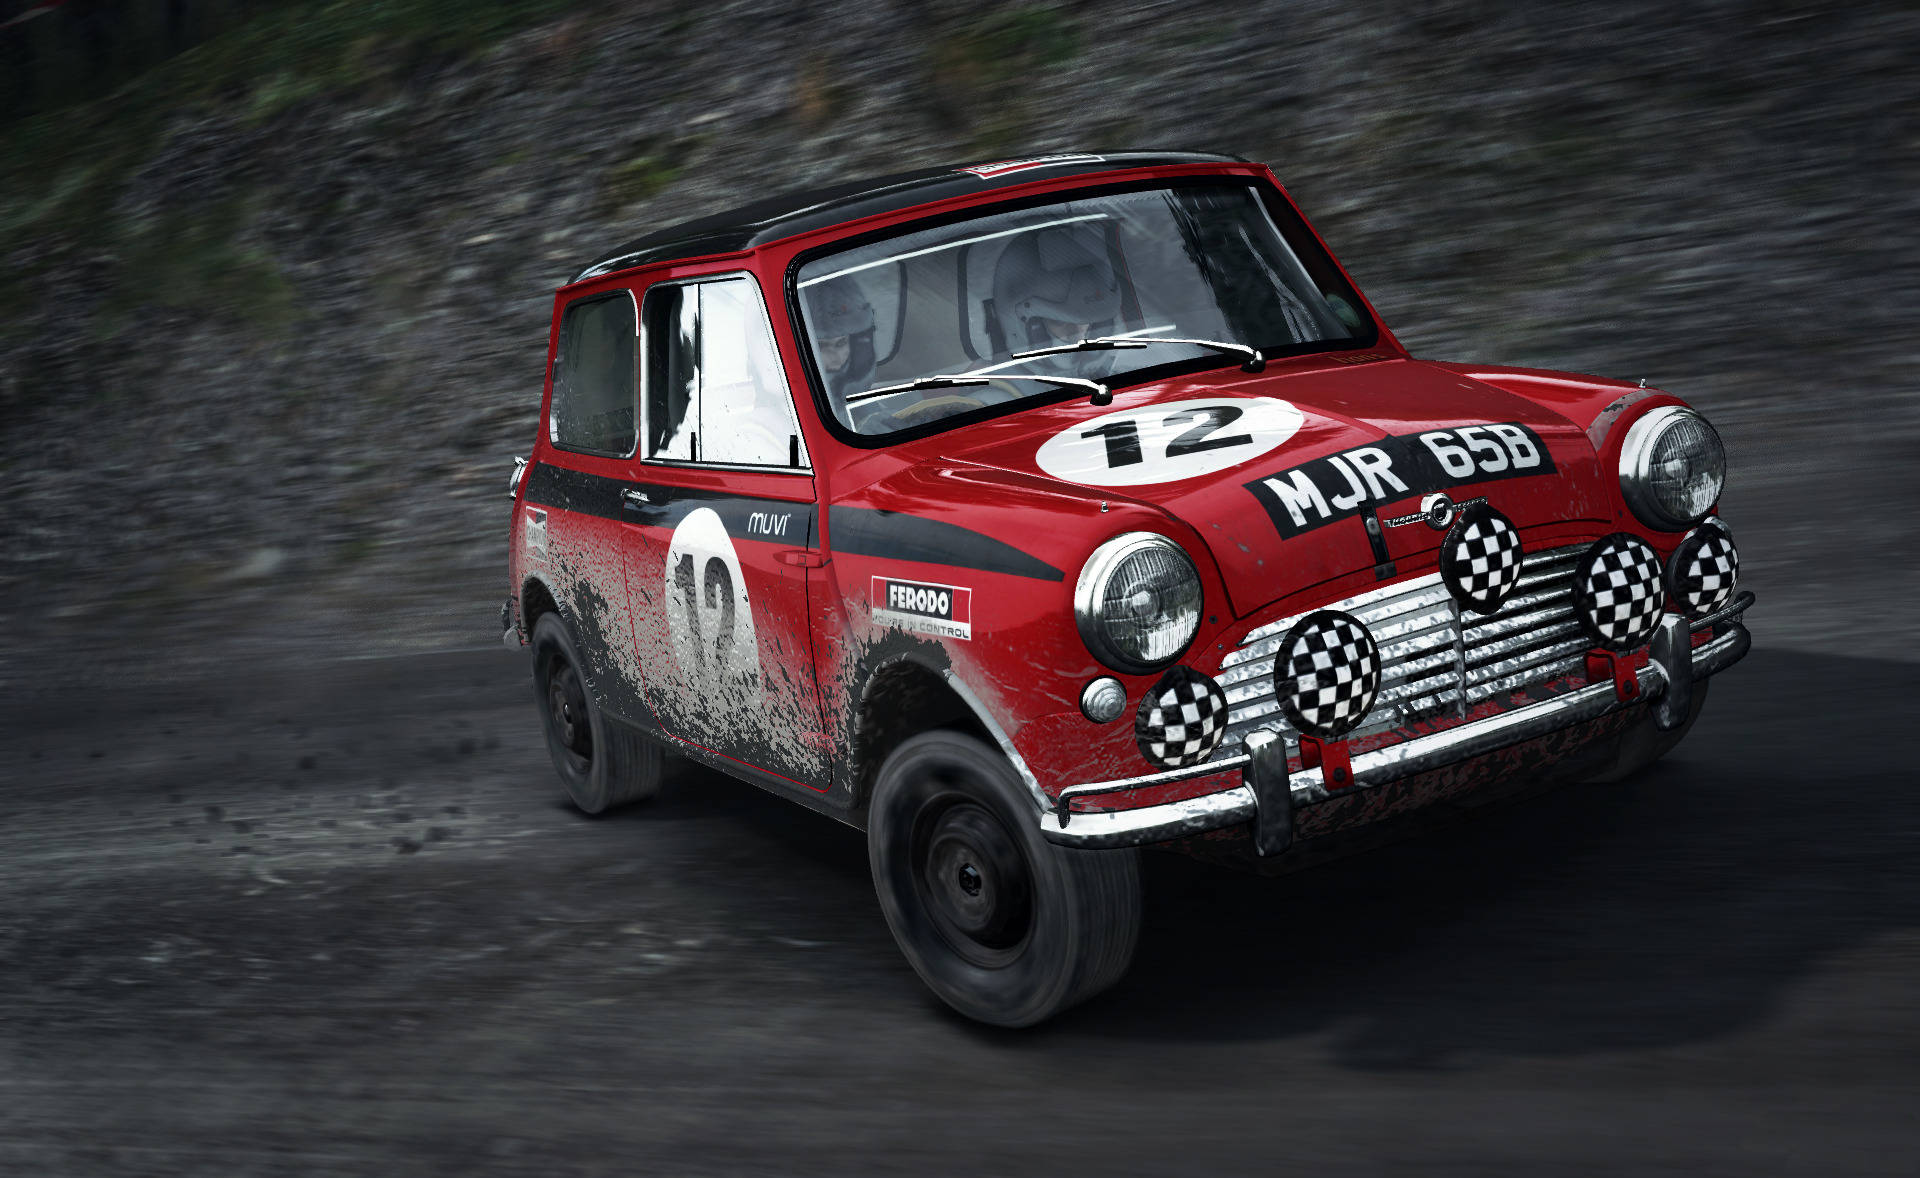 However, If The Reference Is To A Computer Or Mobile Wallpaper Featuring The Dirt Rally Game With A Mini Cooper S, It Could Be Translated As 